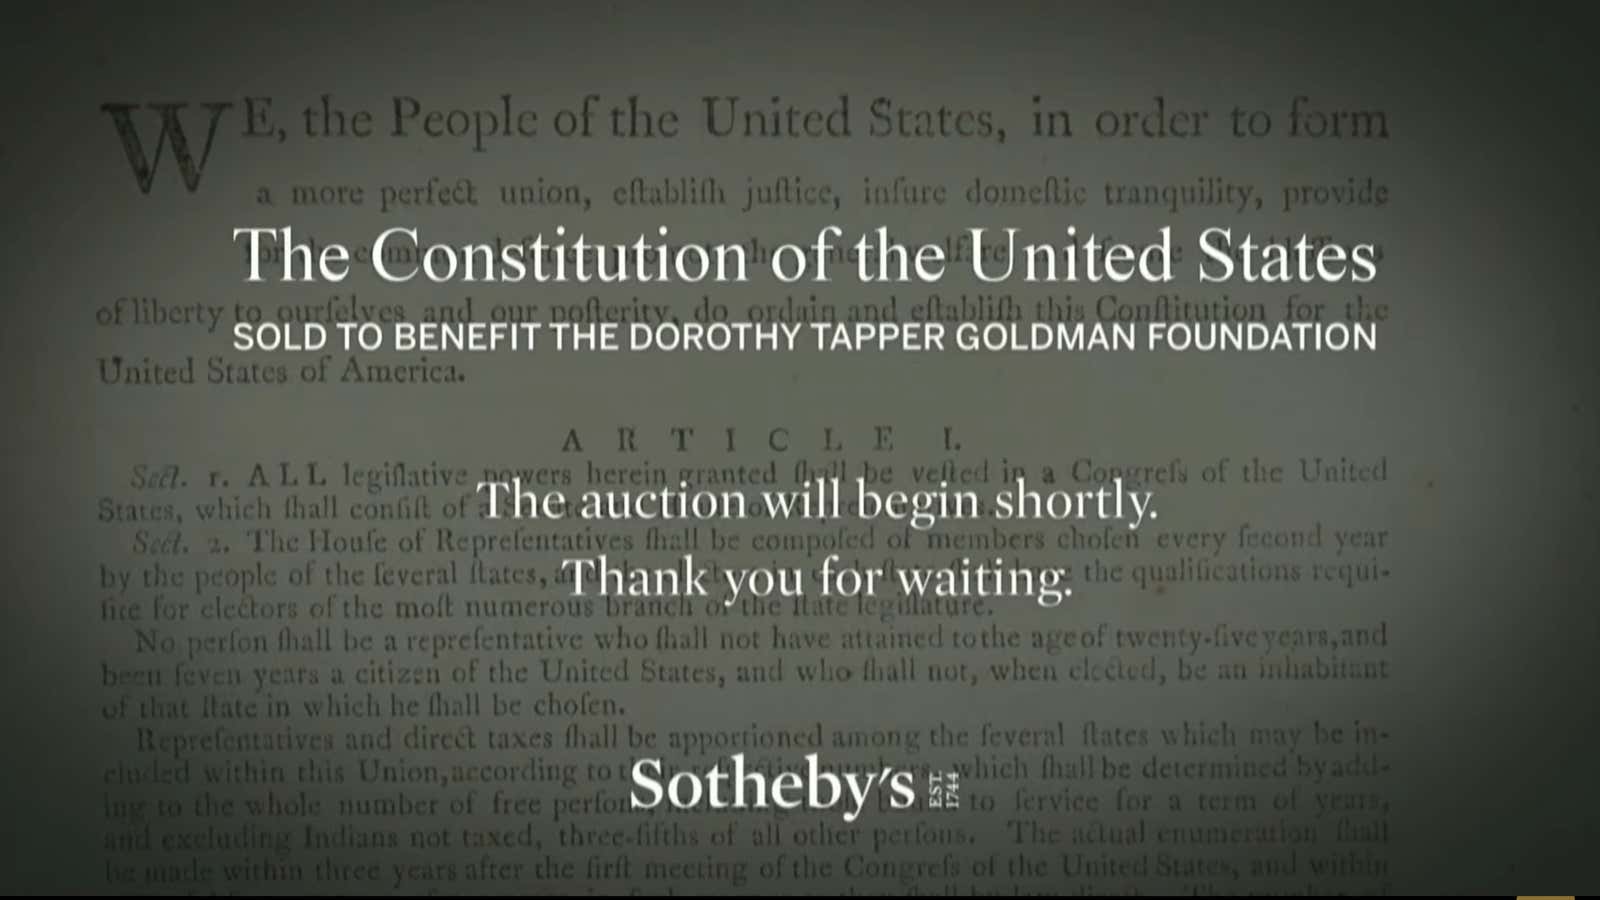 Sotheby’s sold a copy of the US Constitution on Nov. 18—but the crypto collective didn’t win.